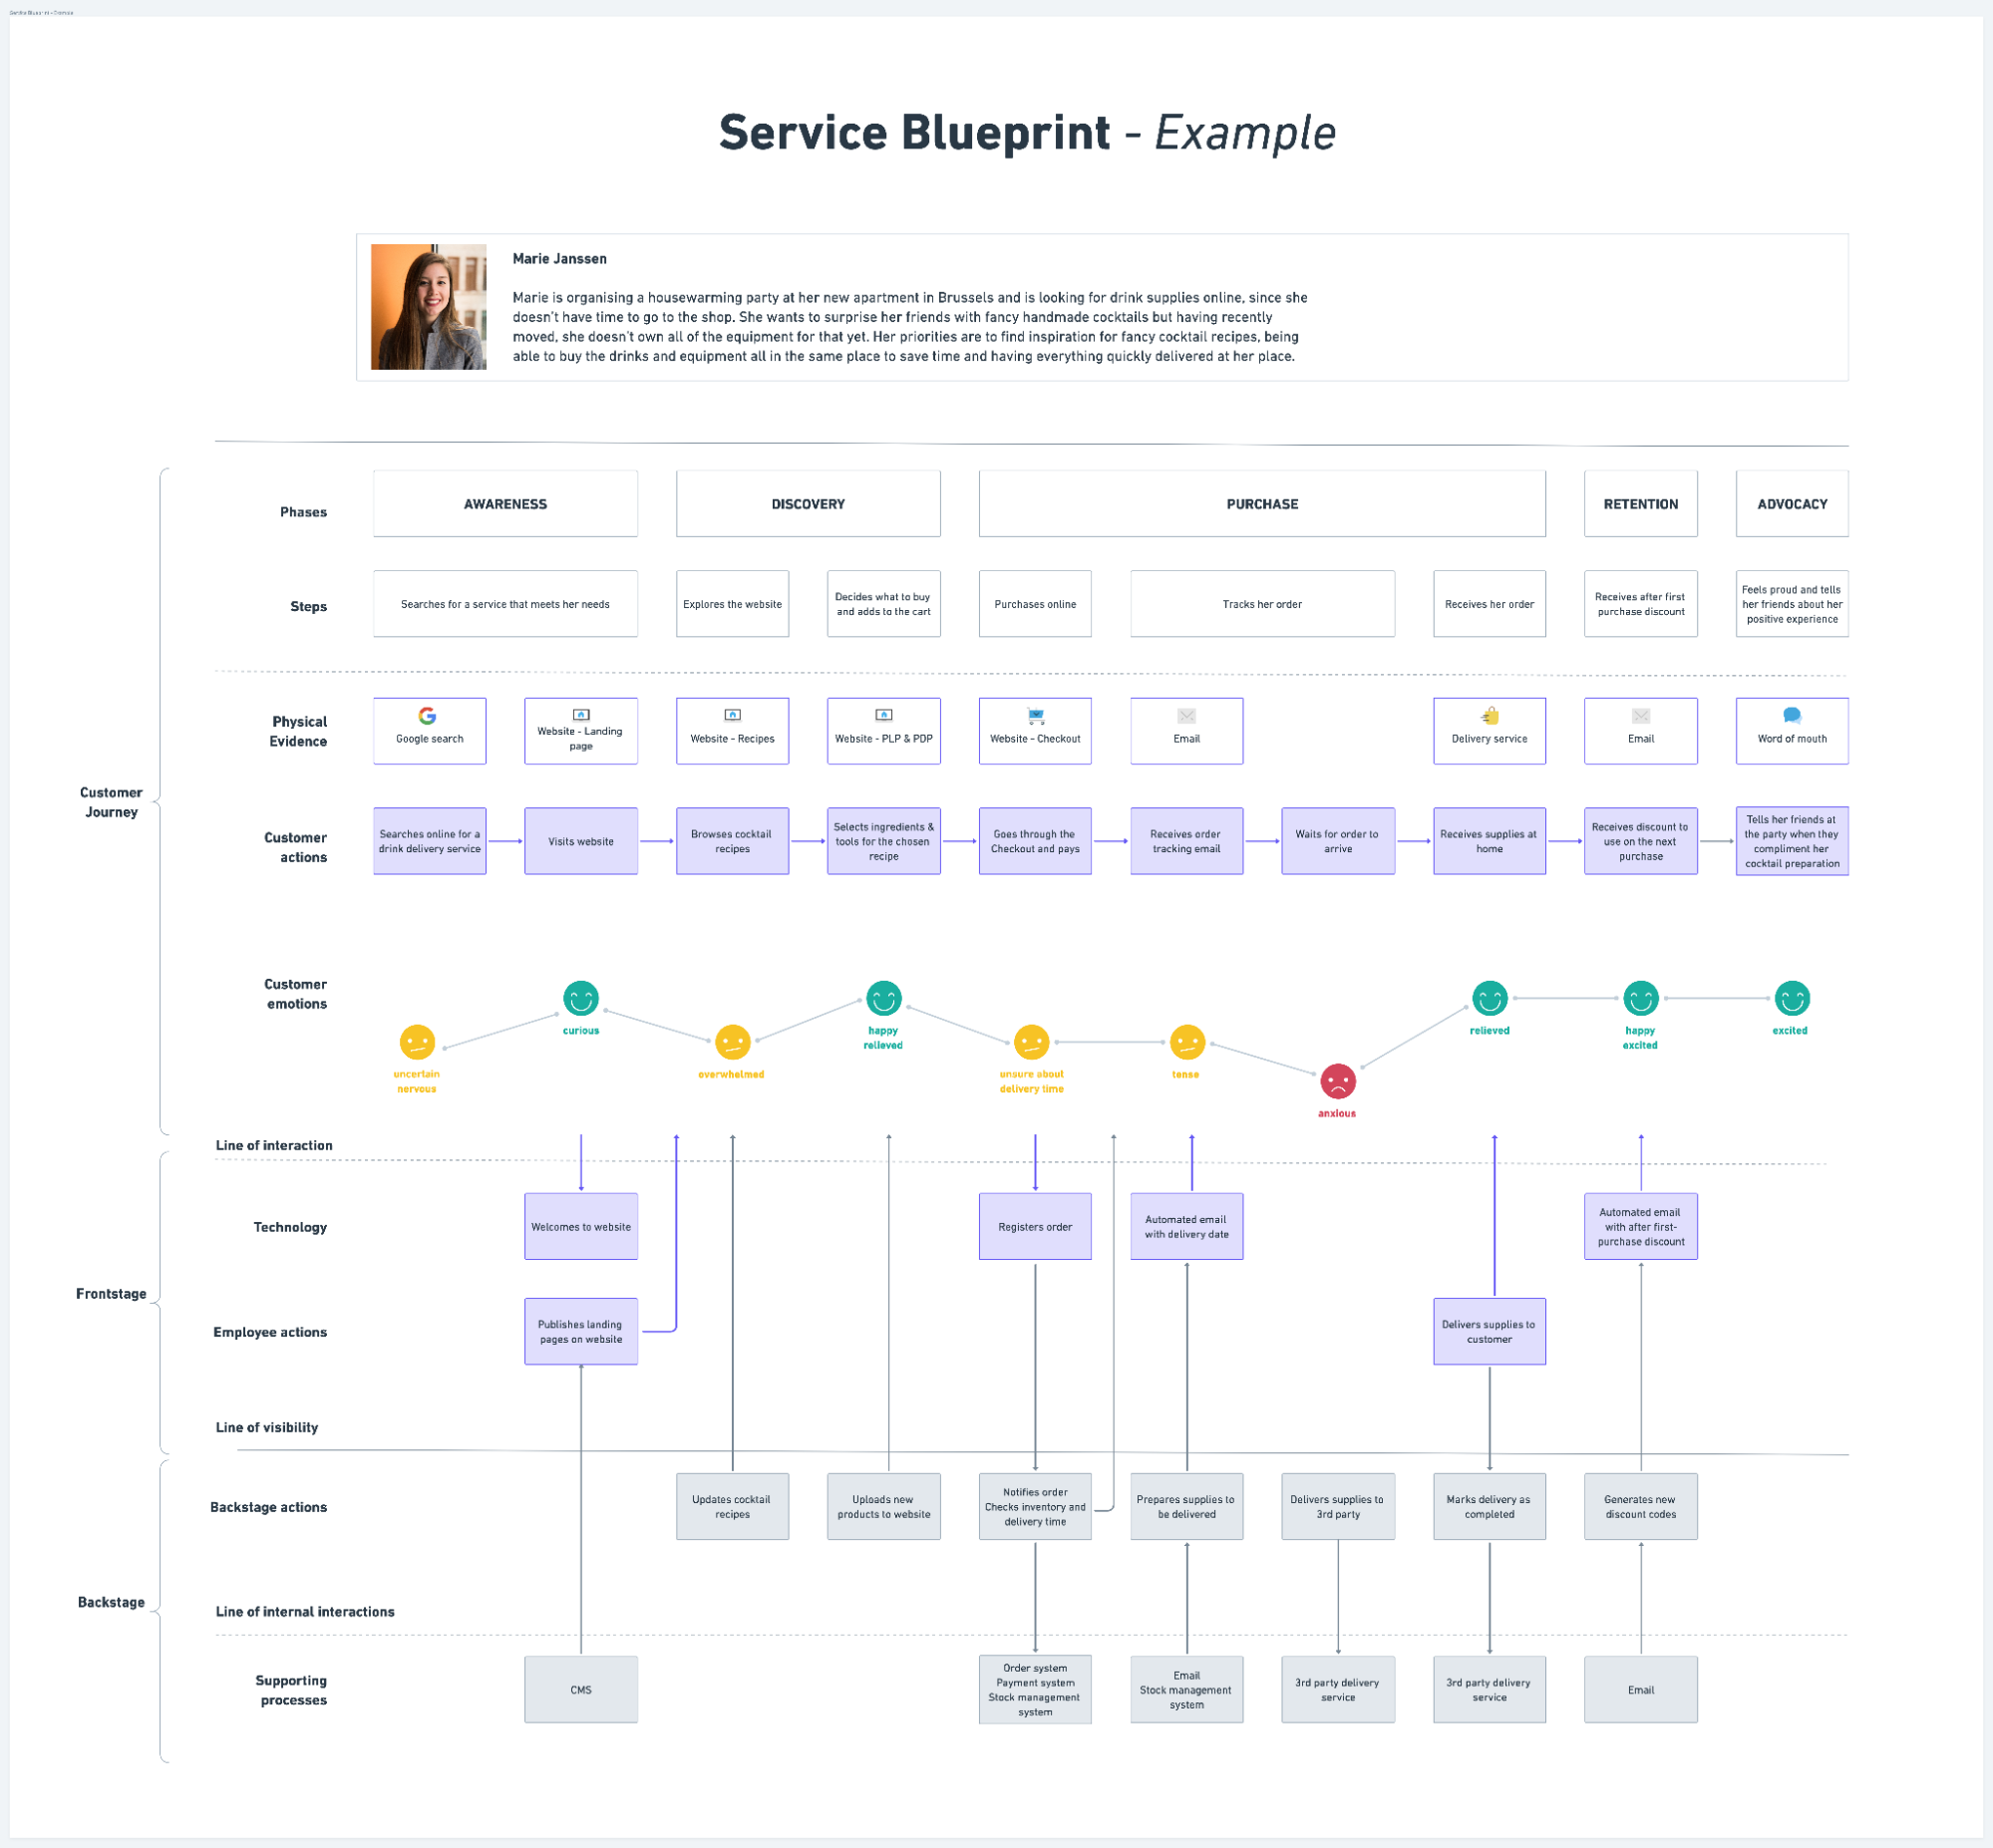 image of example of completed service blueprint